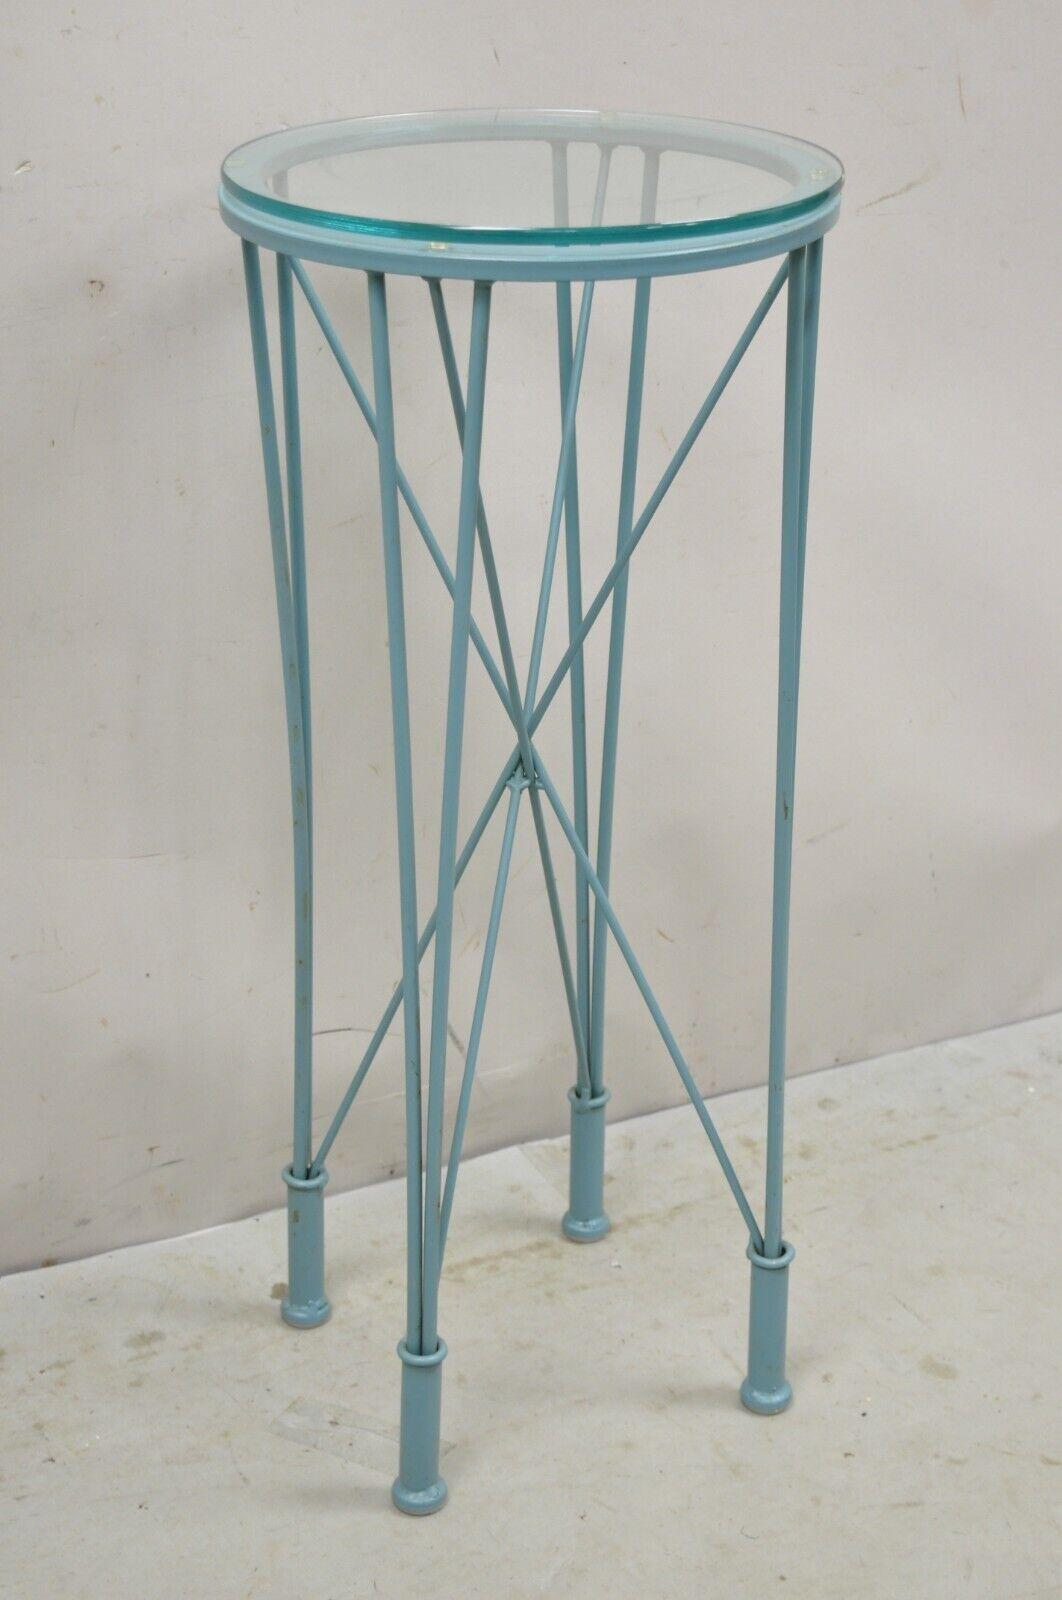 Modern Directoire Style Blue Skyscraper Glass Top Pedestal Plant Stand Side Table. Item features wrought iron construction, glass top, clean modernist lines, great style and form. Circa Late 20th Century
Measurements: 32.5